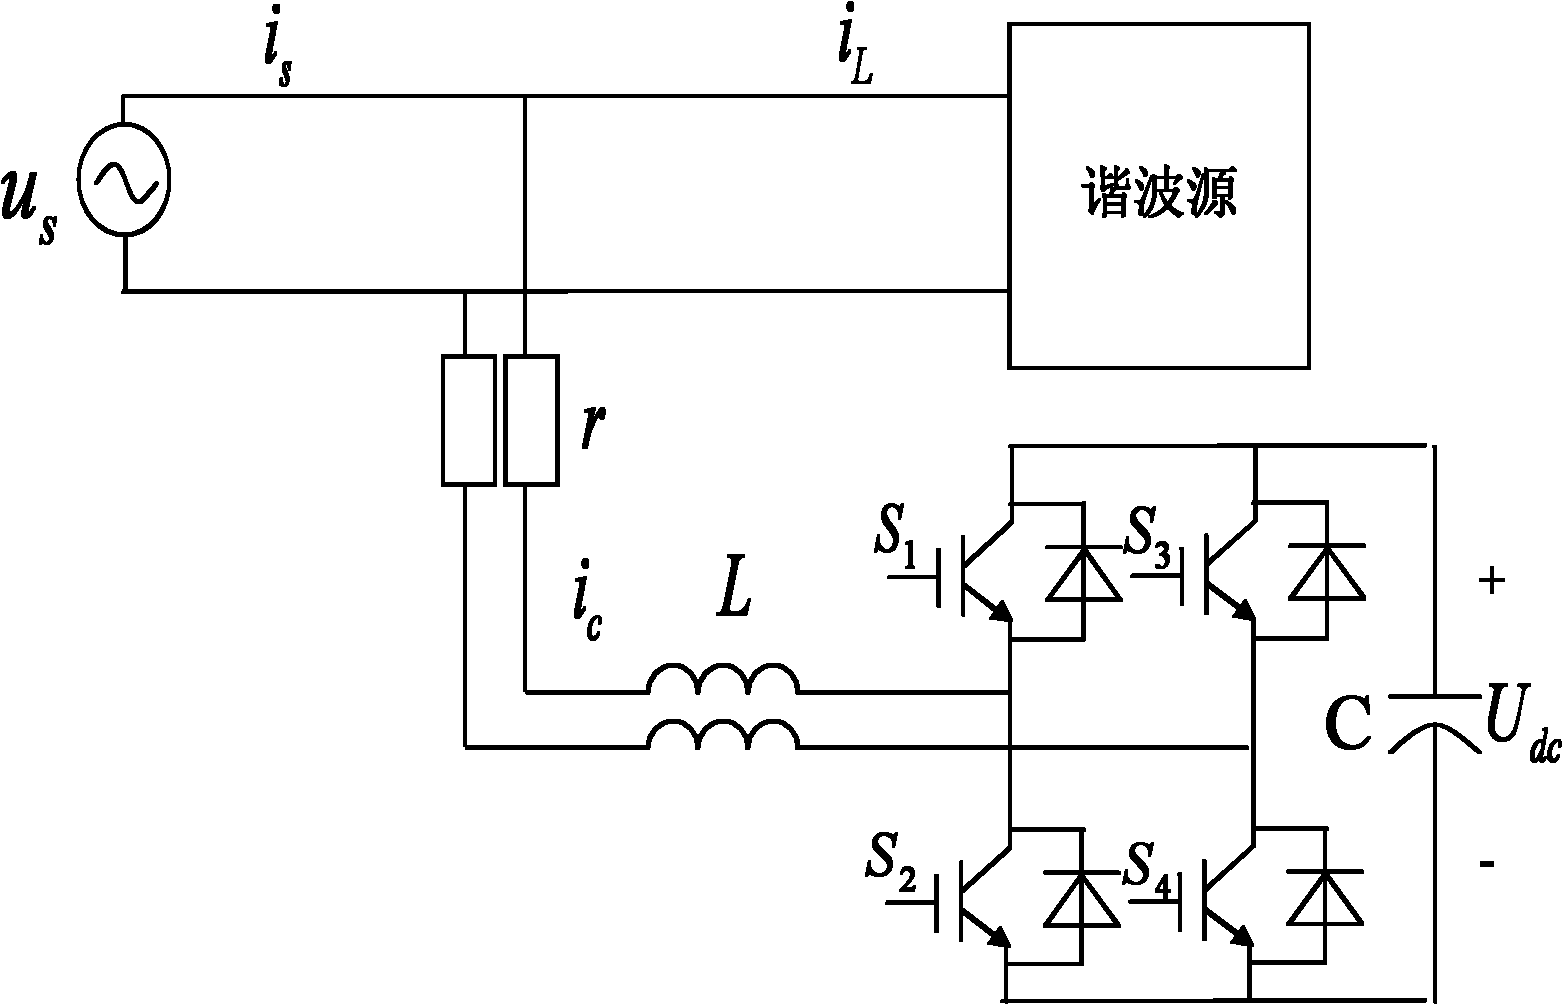 Non-liner switching control method of single-phase shunt active power filter